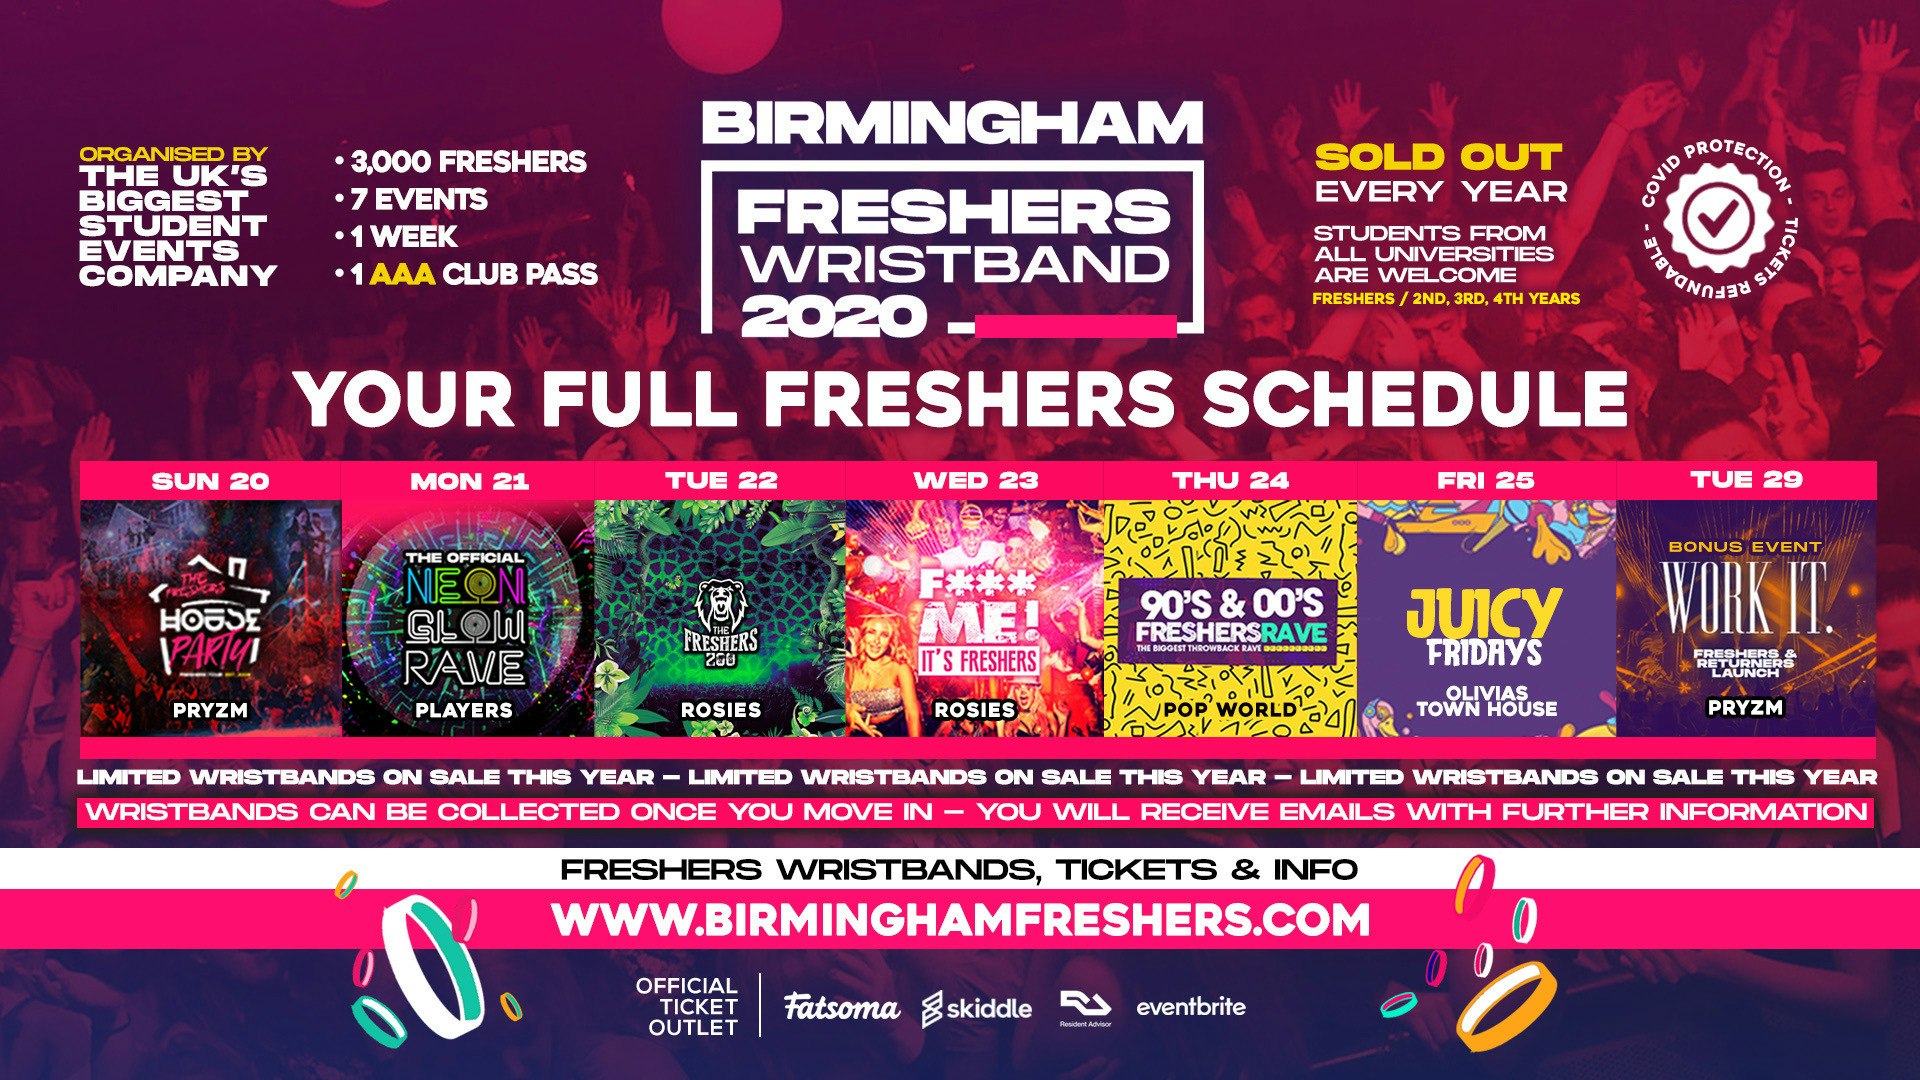 Birmingham Freshers Week Wristband 2020 | Pre-Sale Registration – Includes the BIGGEST events at PRYZM, ROSIES & much more!